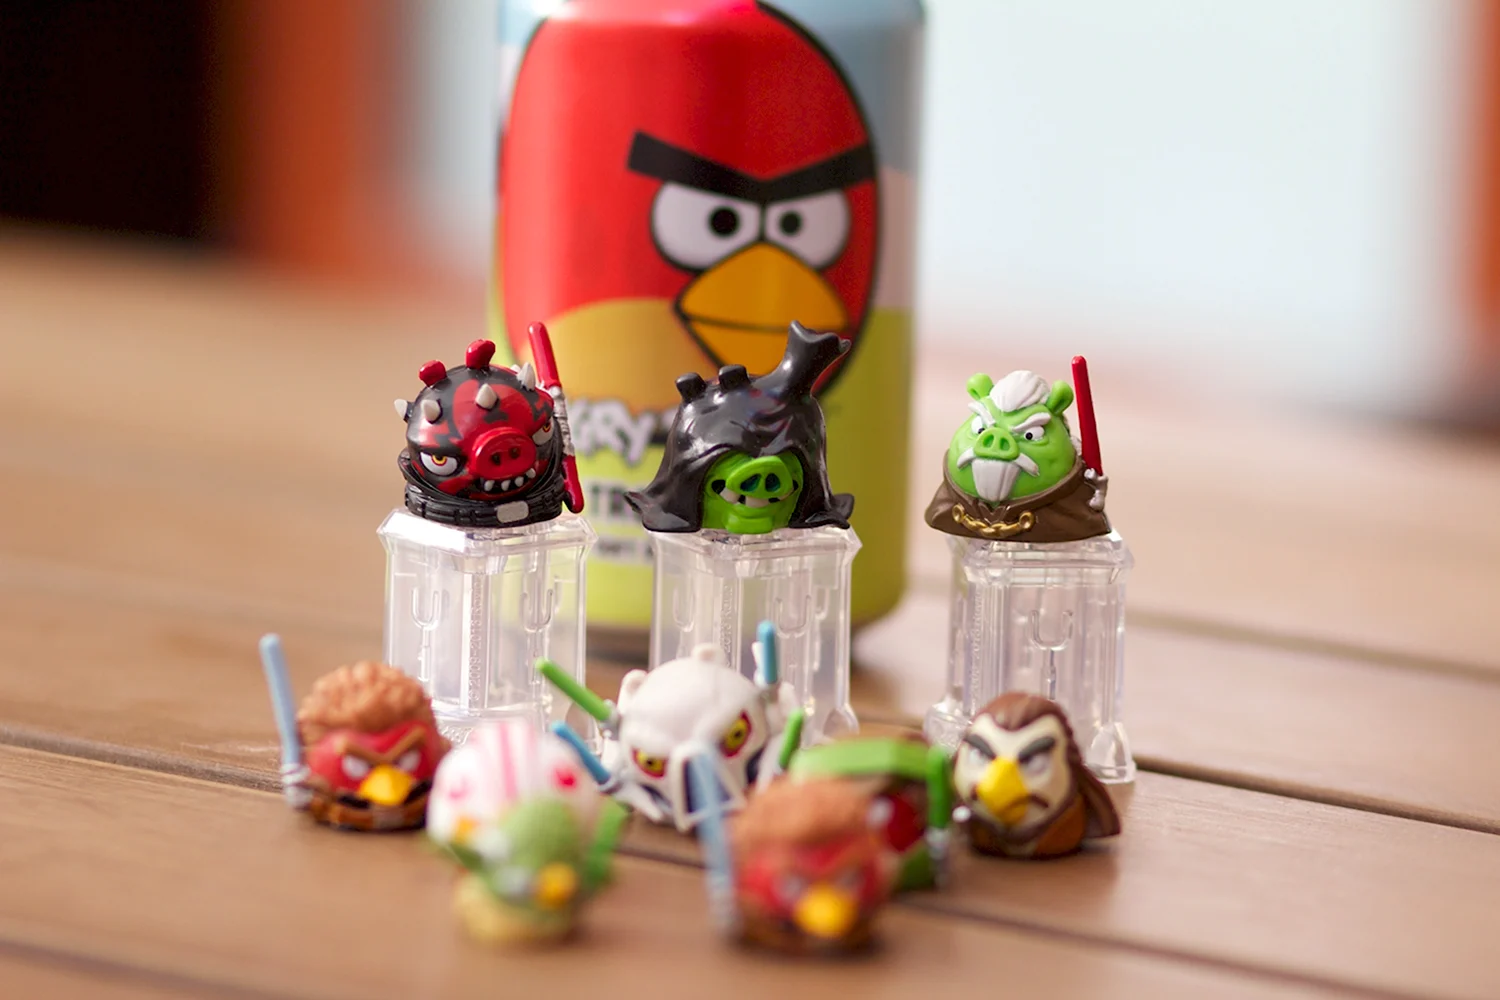 2012 Telepods Angry Birds Star Wars